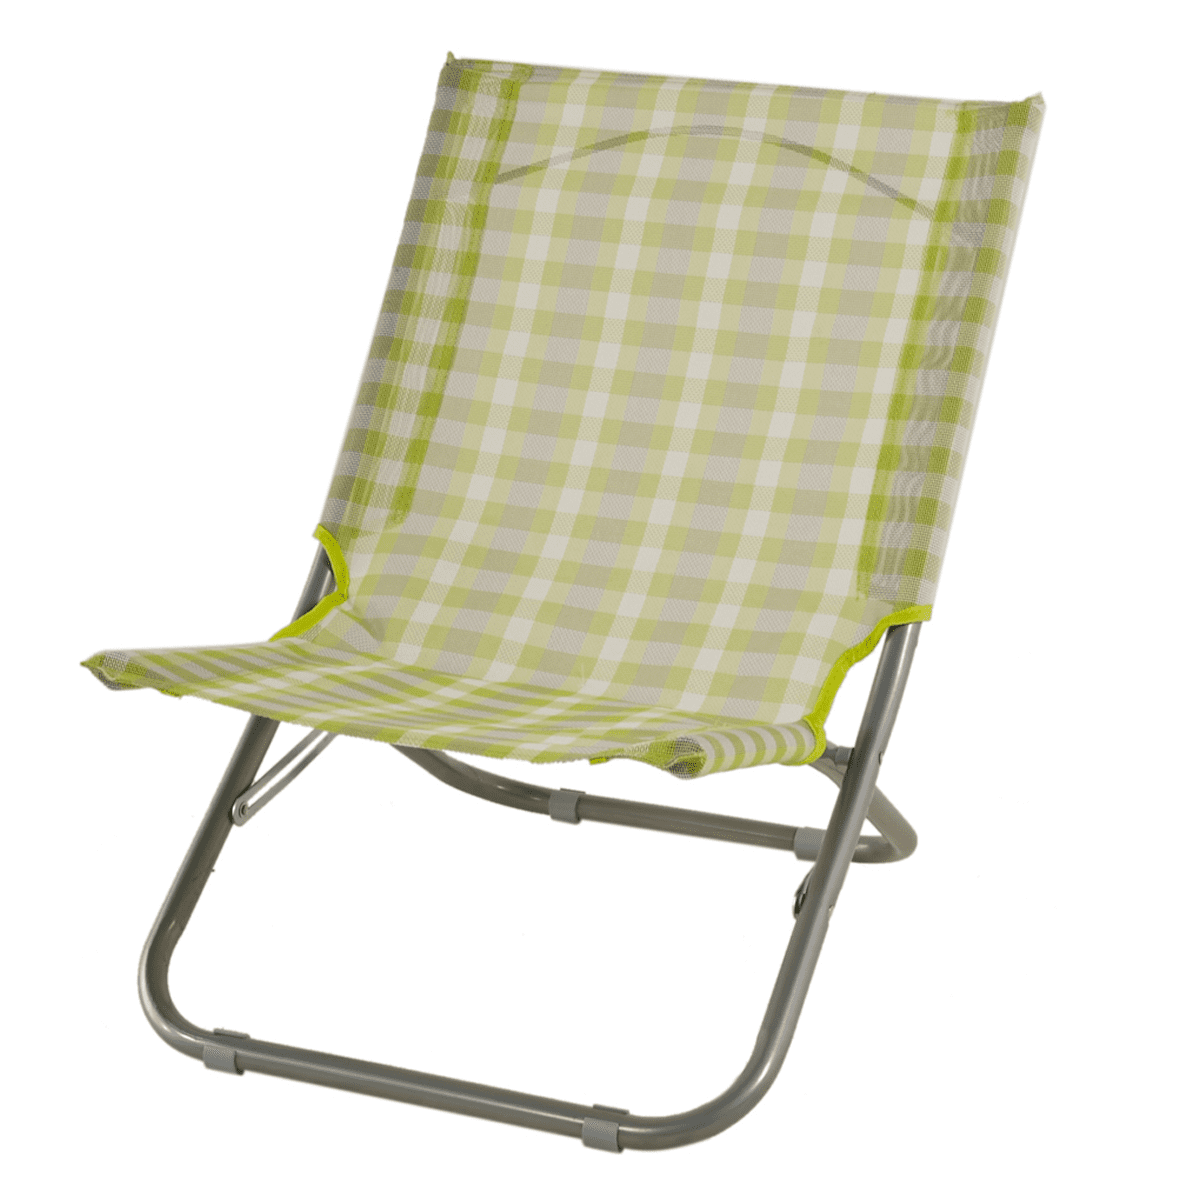 Outdoor Folding Chair in 54 x 41 x 33cm